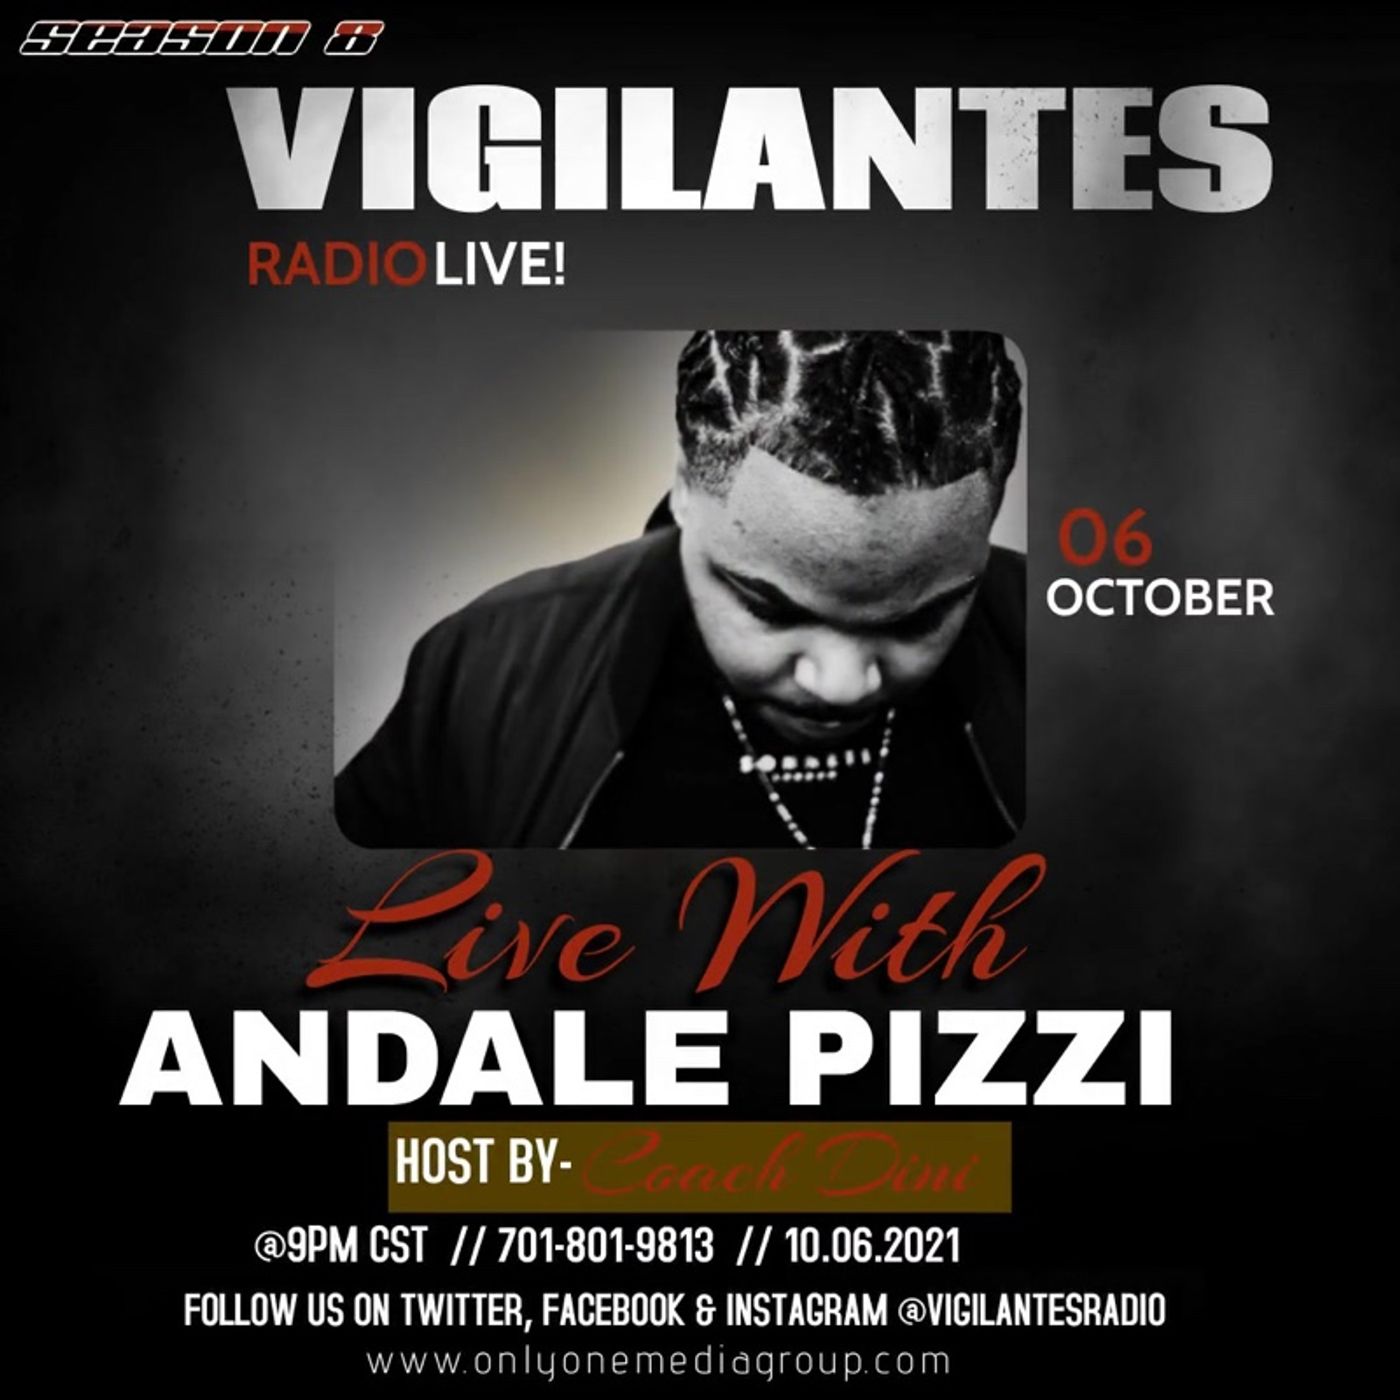 The Andale Pizzi Interview. Image